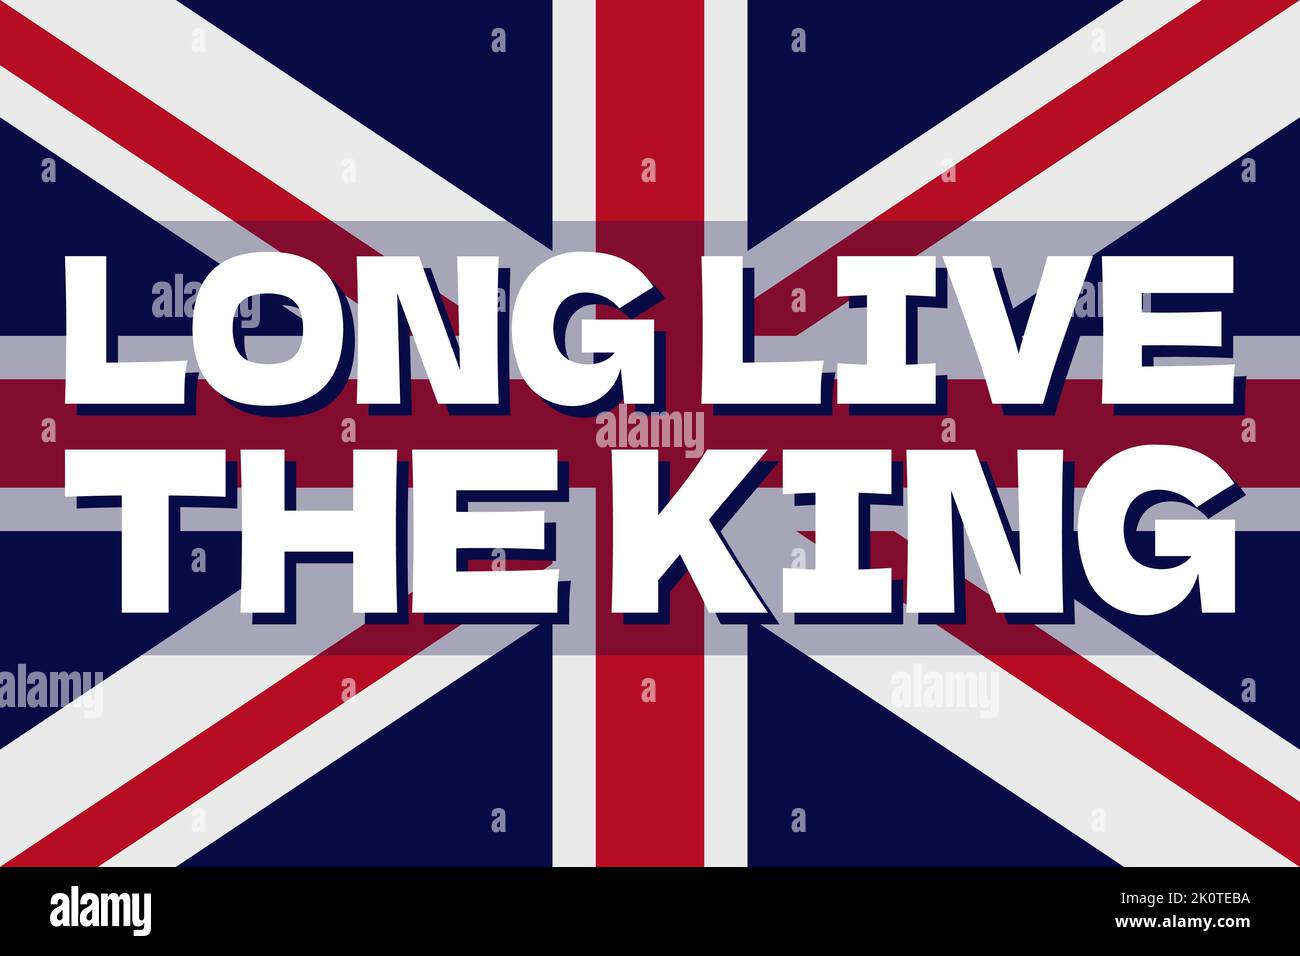 Long live the king script on British flag backgroug. Transfer of supreme power of monarch concept. Proclamation of a new king in England. Changing kingship traditional phrase. Vector illustration. Stock Vector